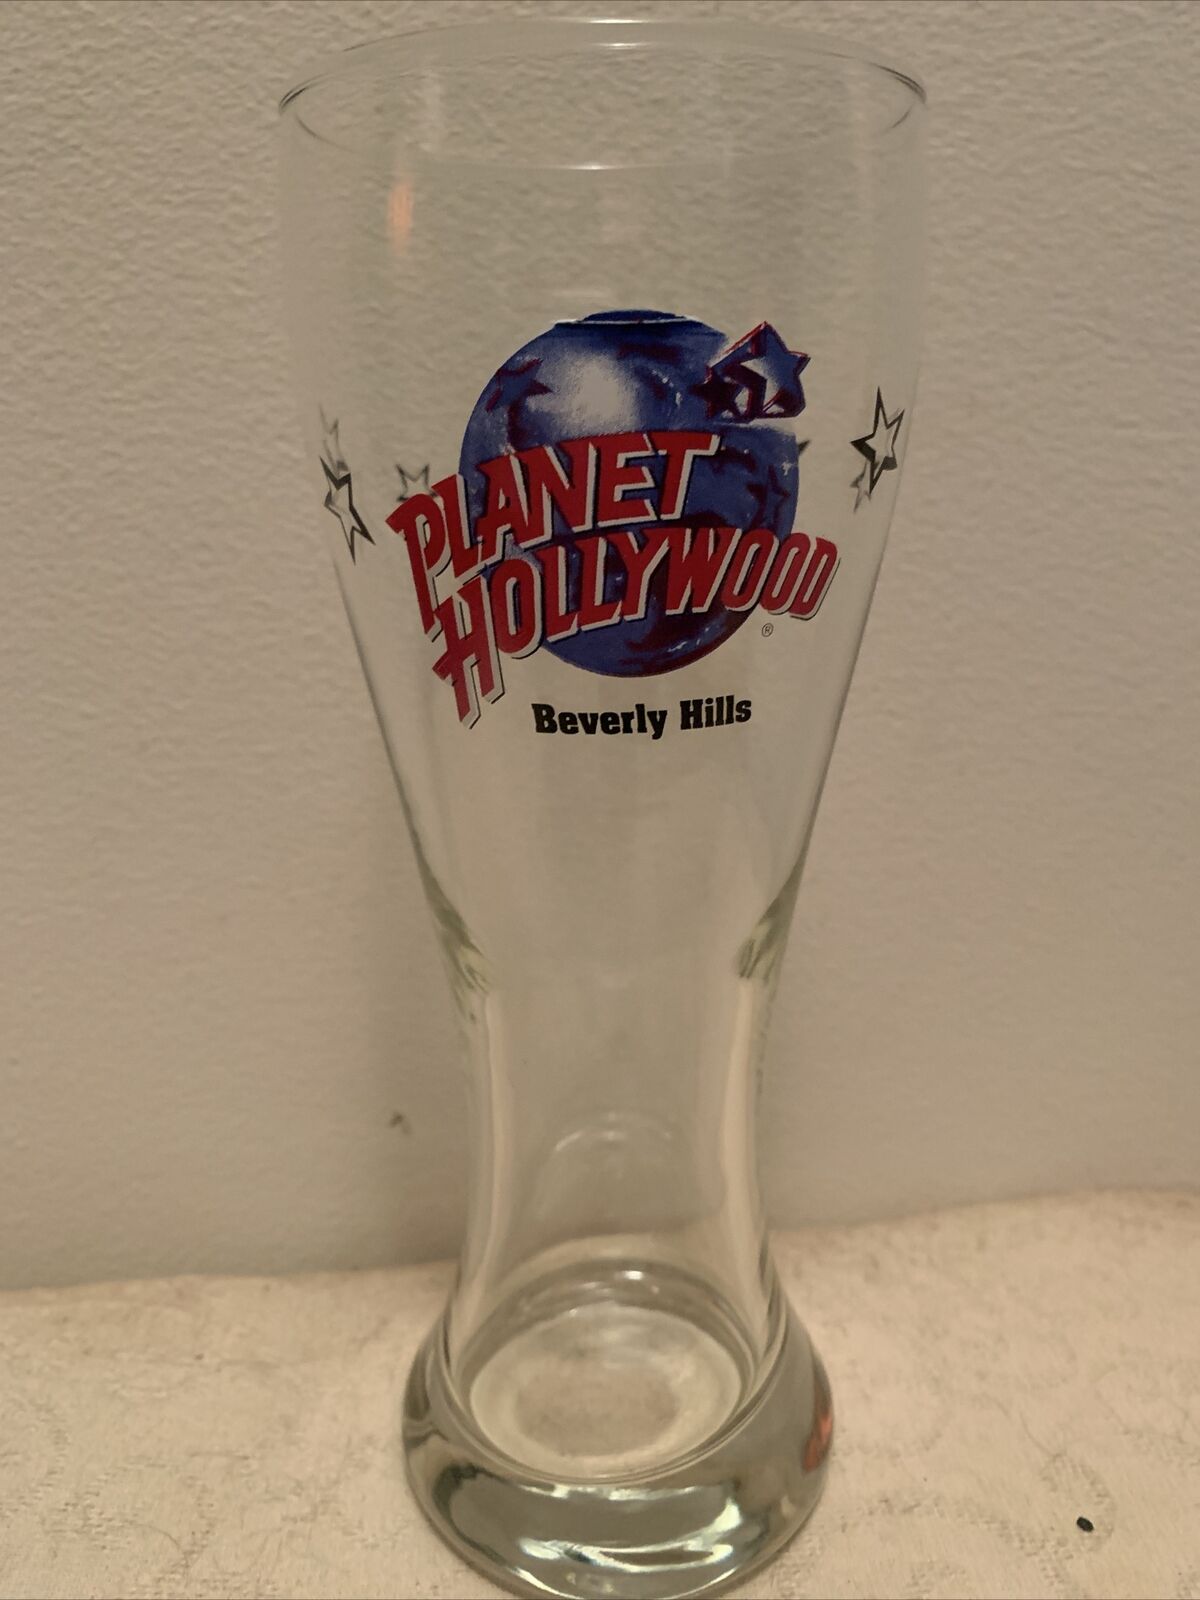 Planet Hollywood Beer Glass - Beverly Hills